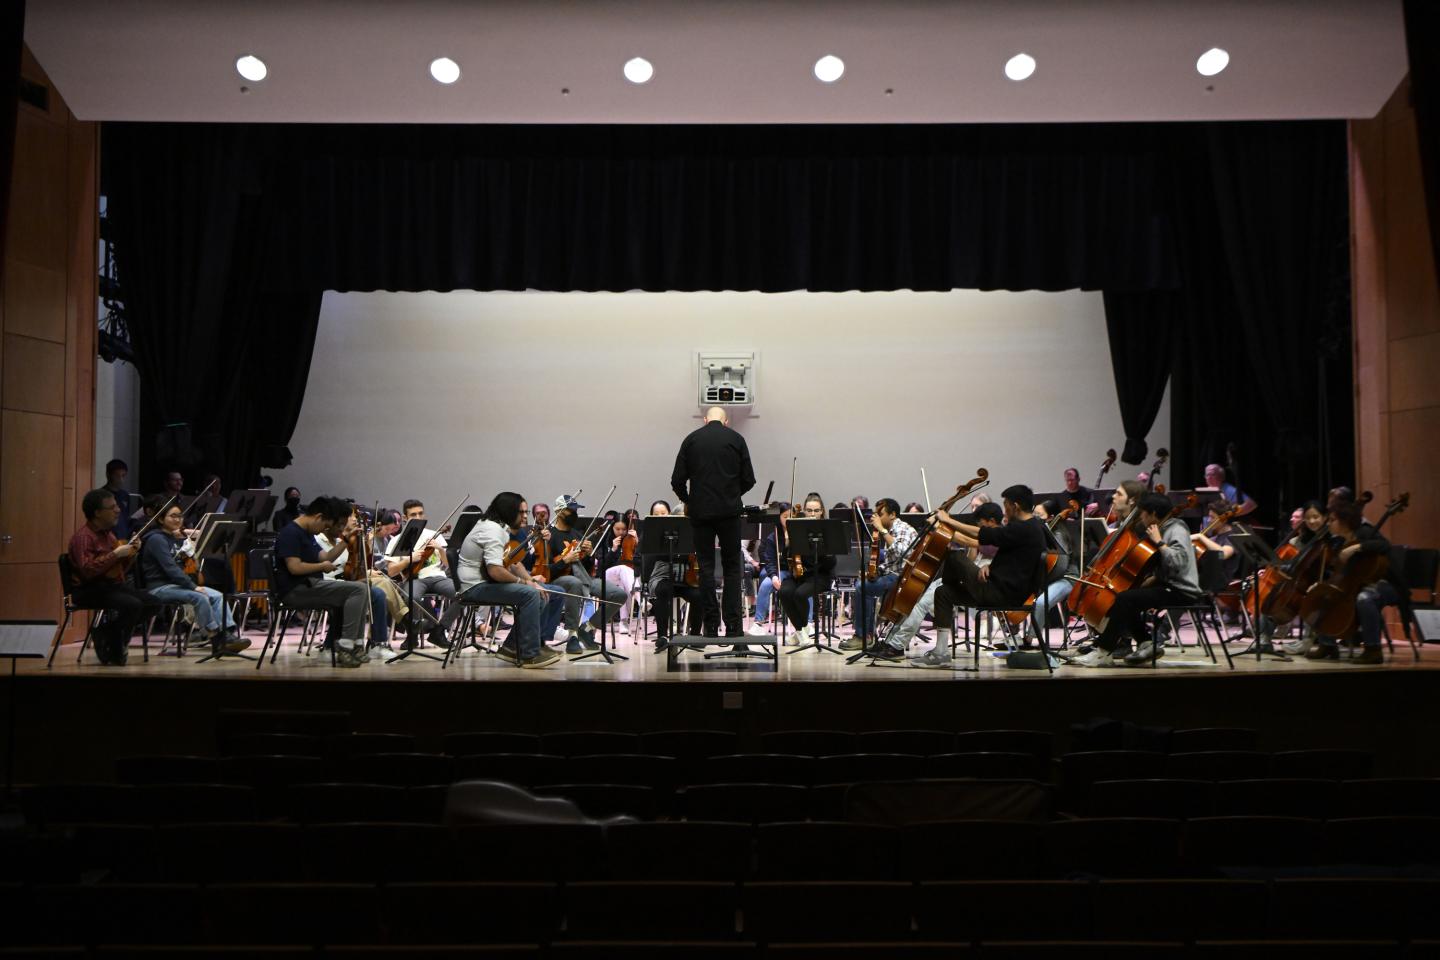 An image that shows a wide view of the Shriver Hall Auditorium stage where the HSO is practicing